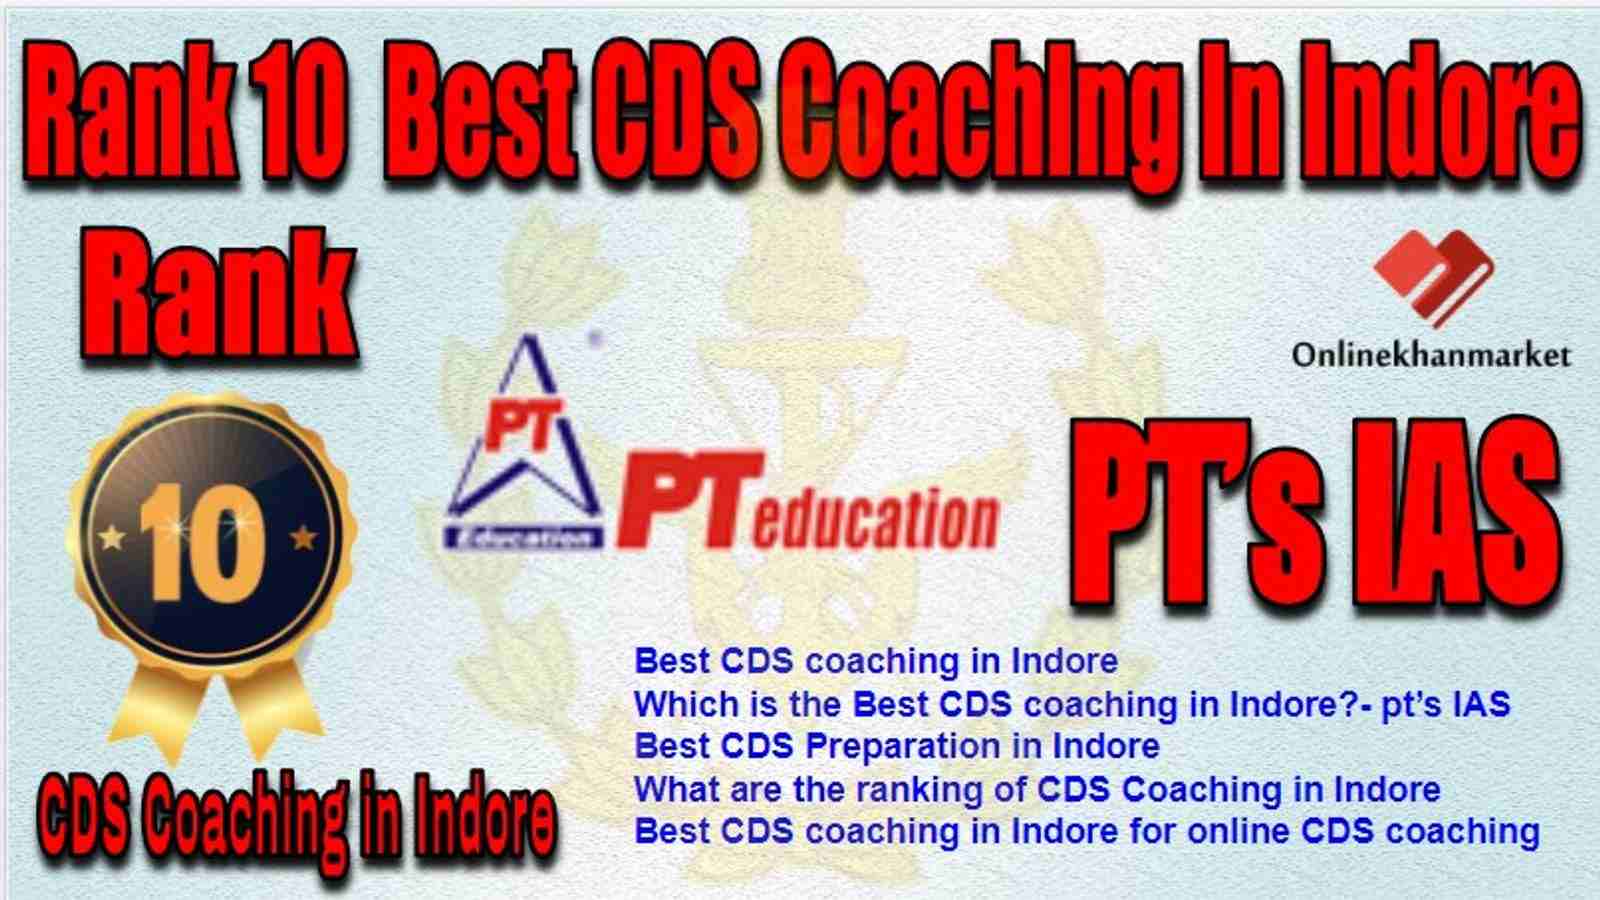 Rank 10 Best CDS Coaching in indore